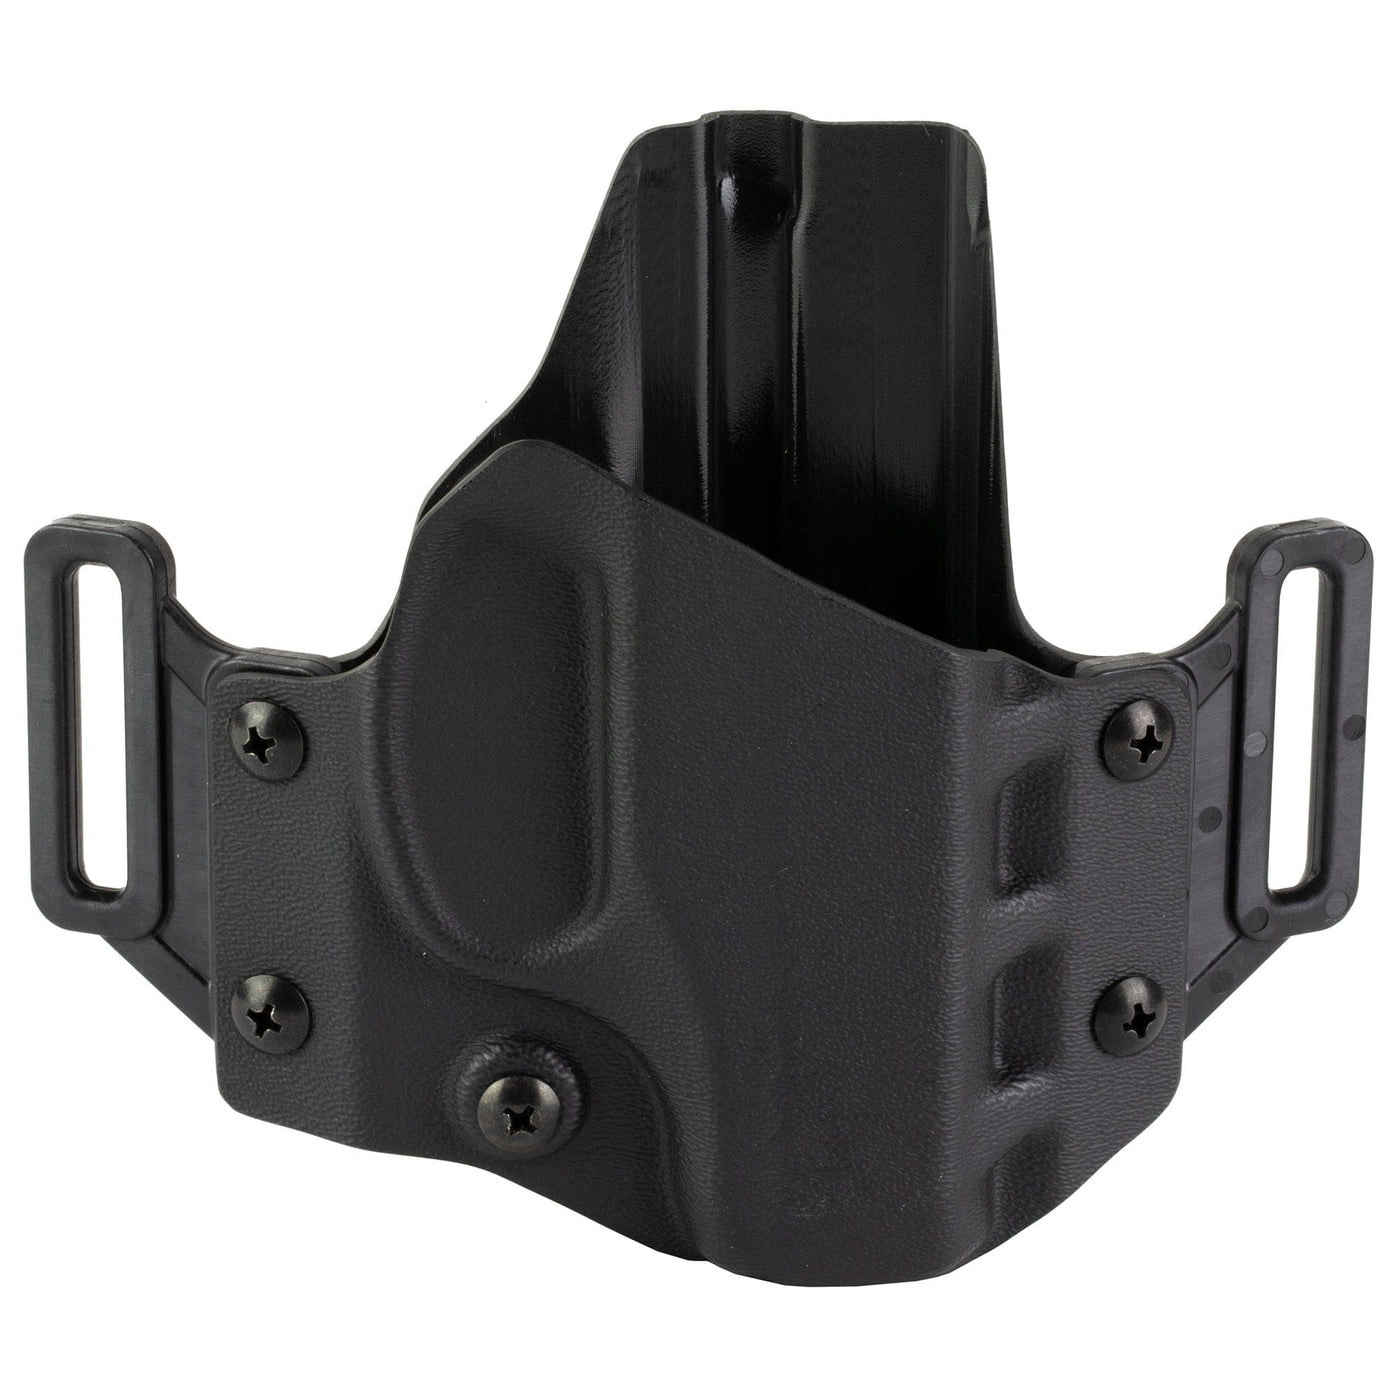 Crucial Concealment Crucial Owb For Ruger Lc9/ec9 Holsters